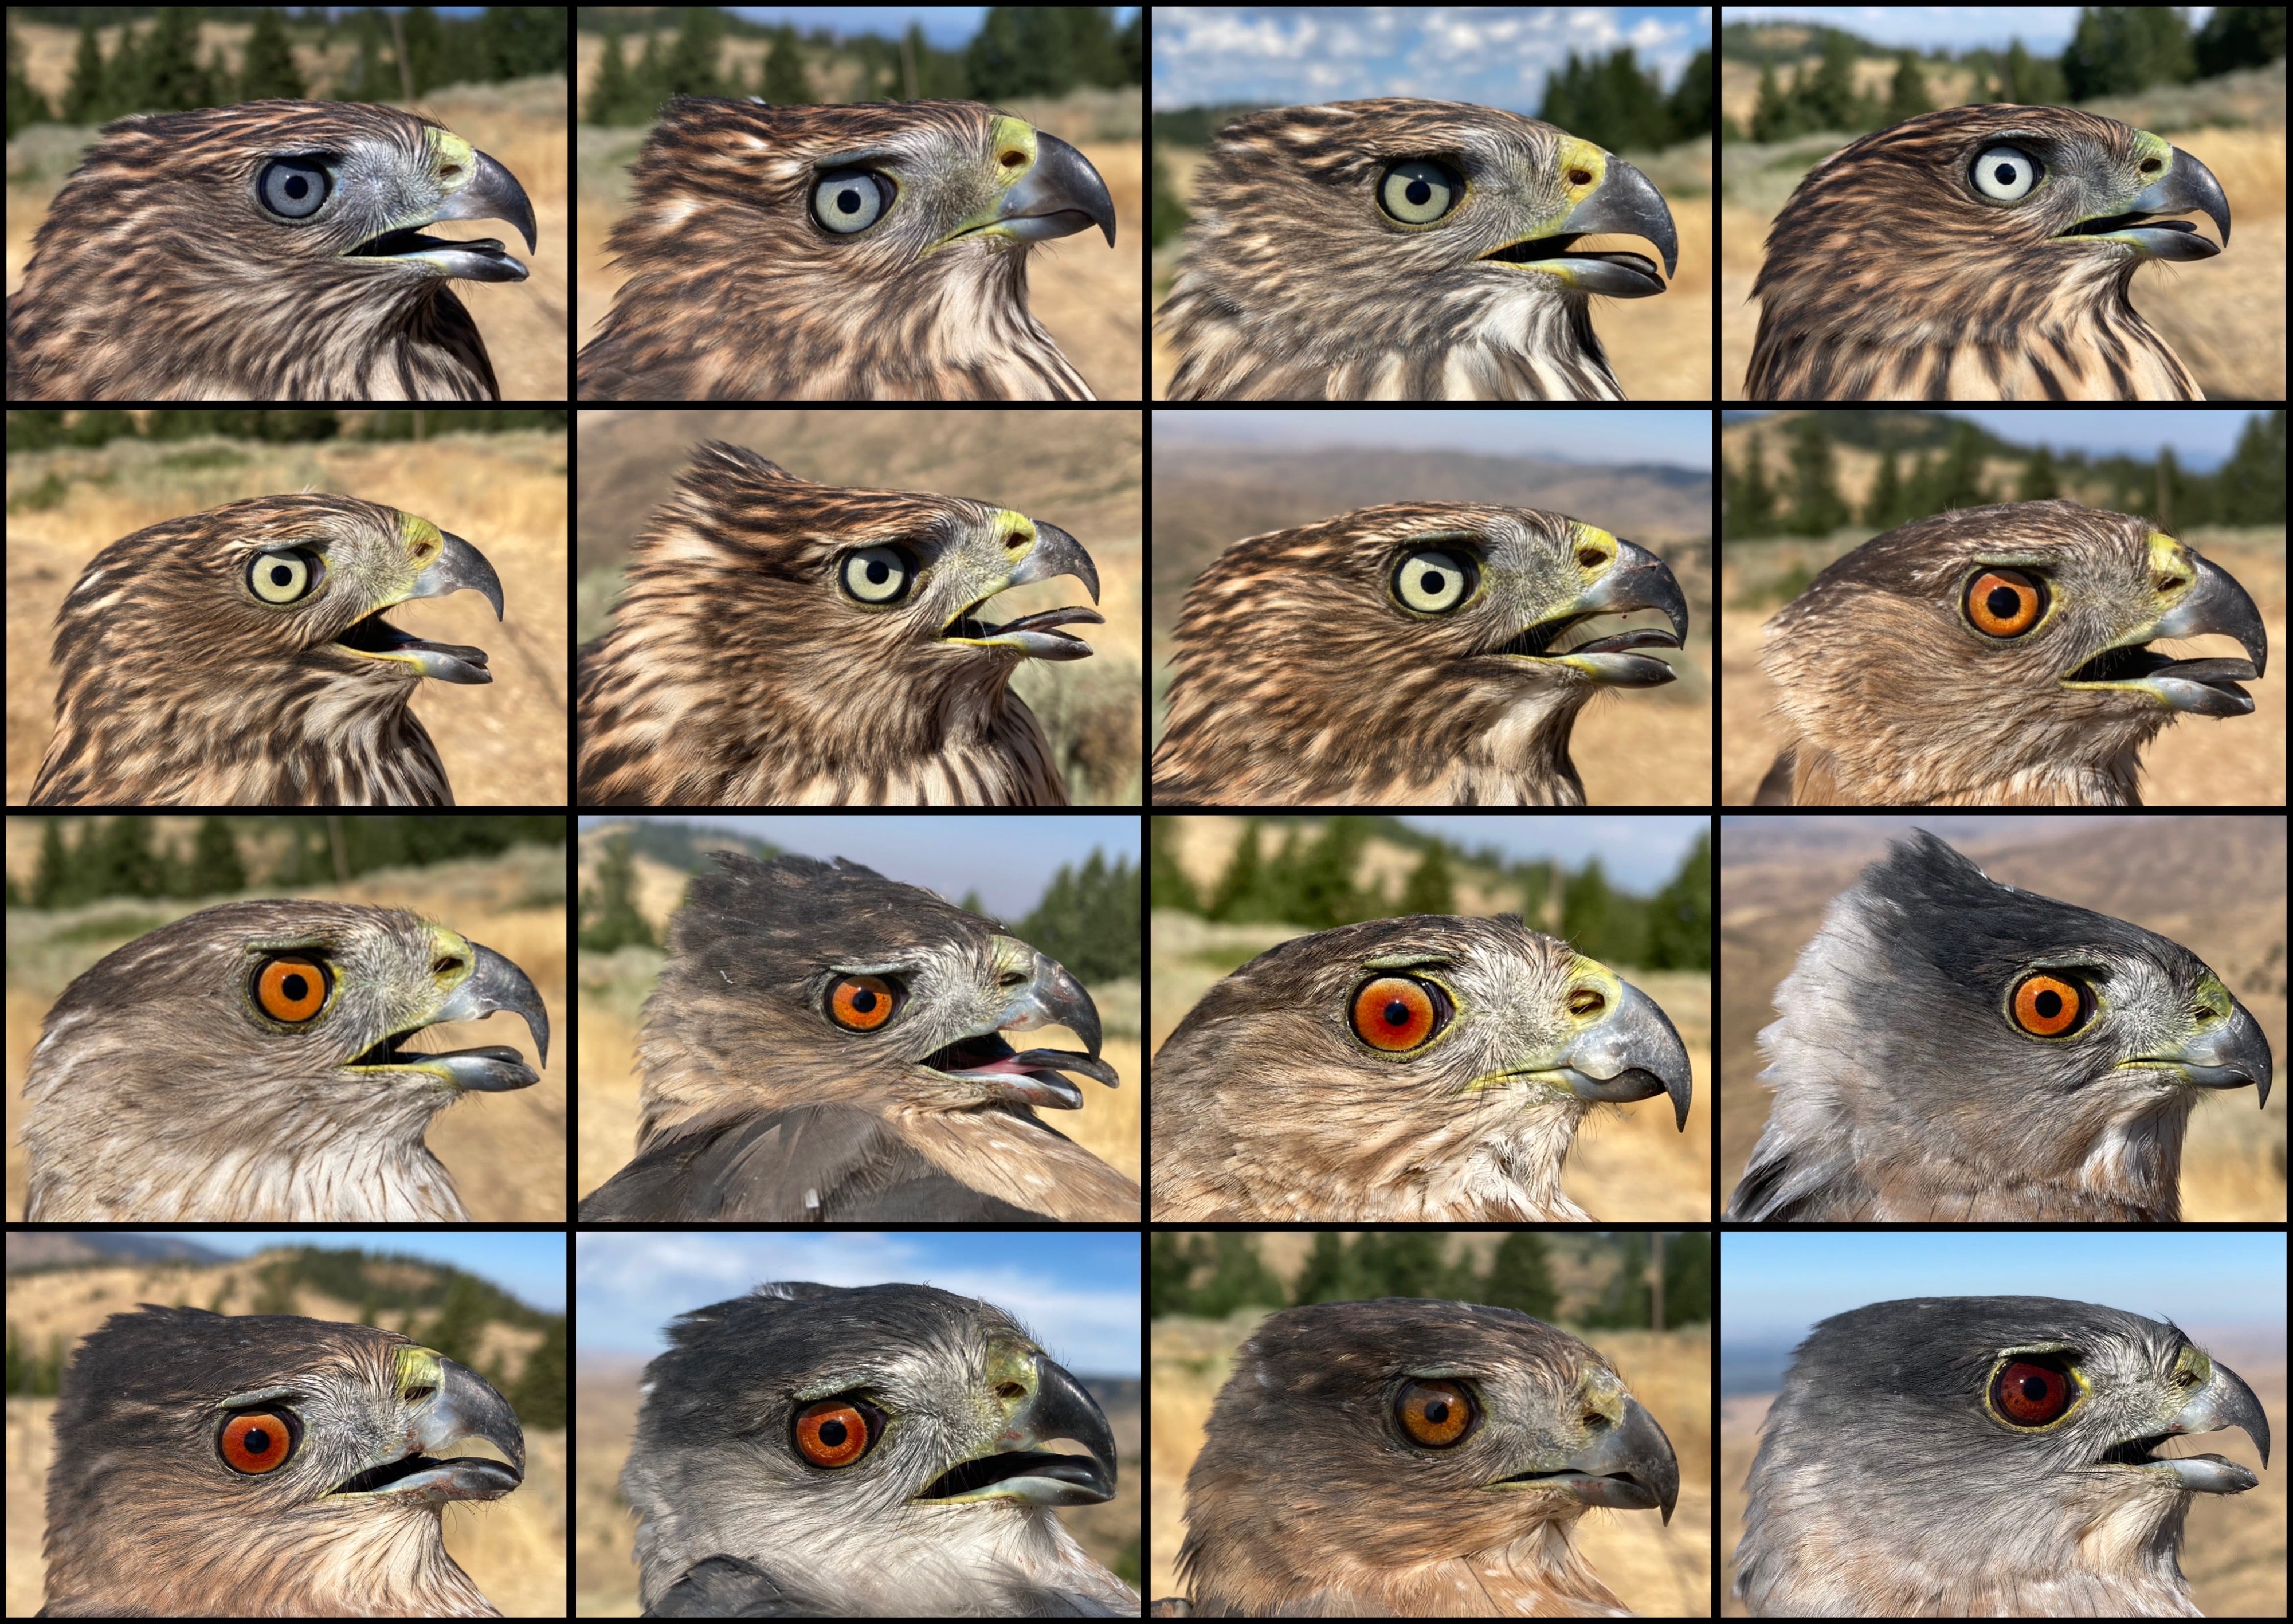 a series of 16 small photos showing cooper's hawk faces.